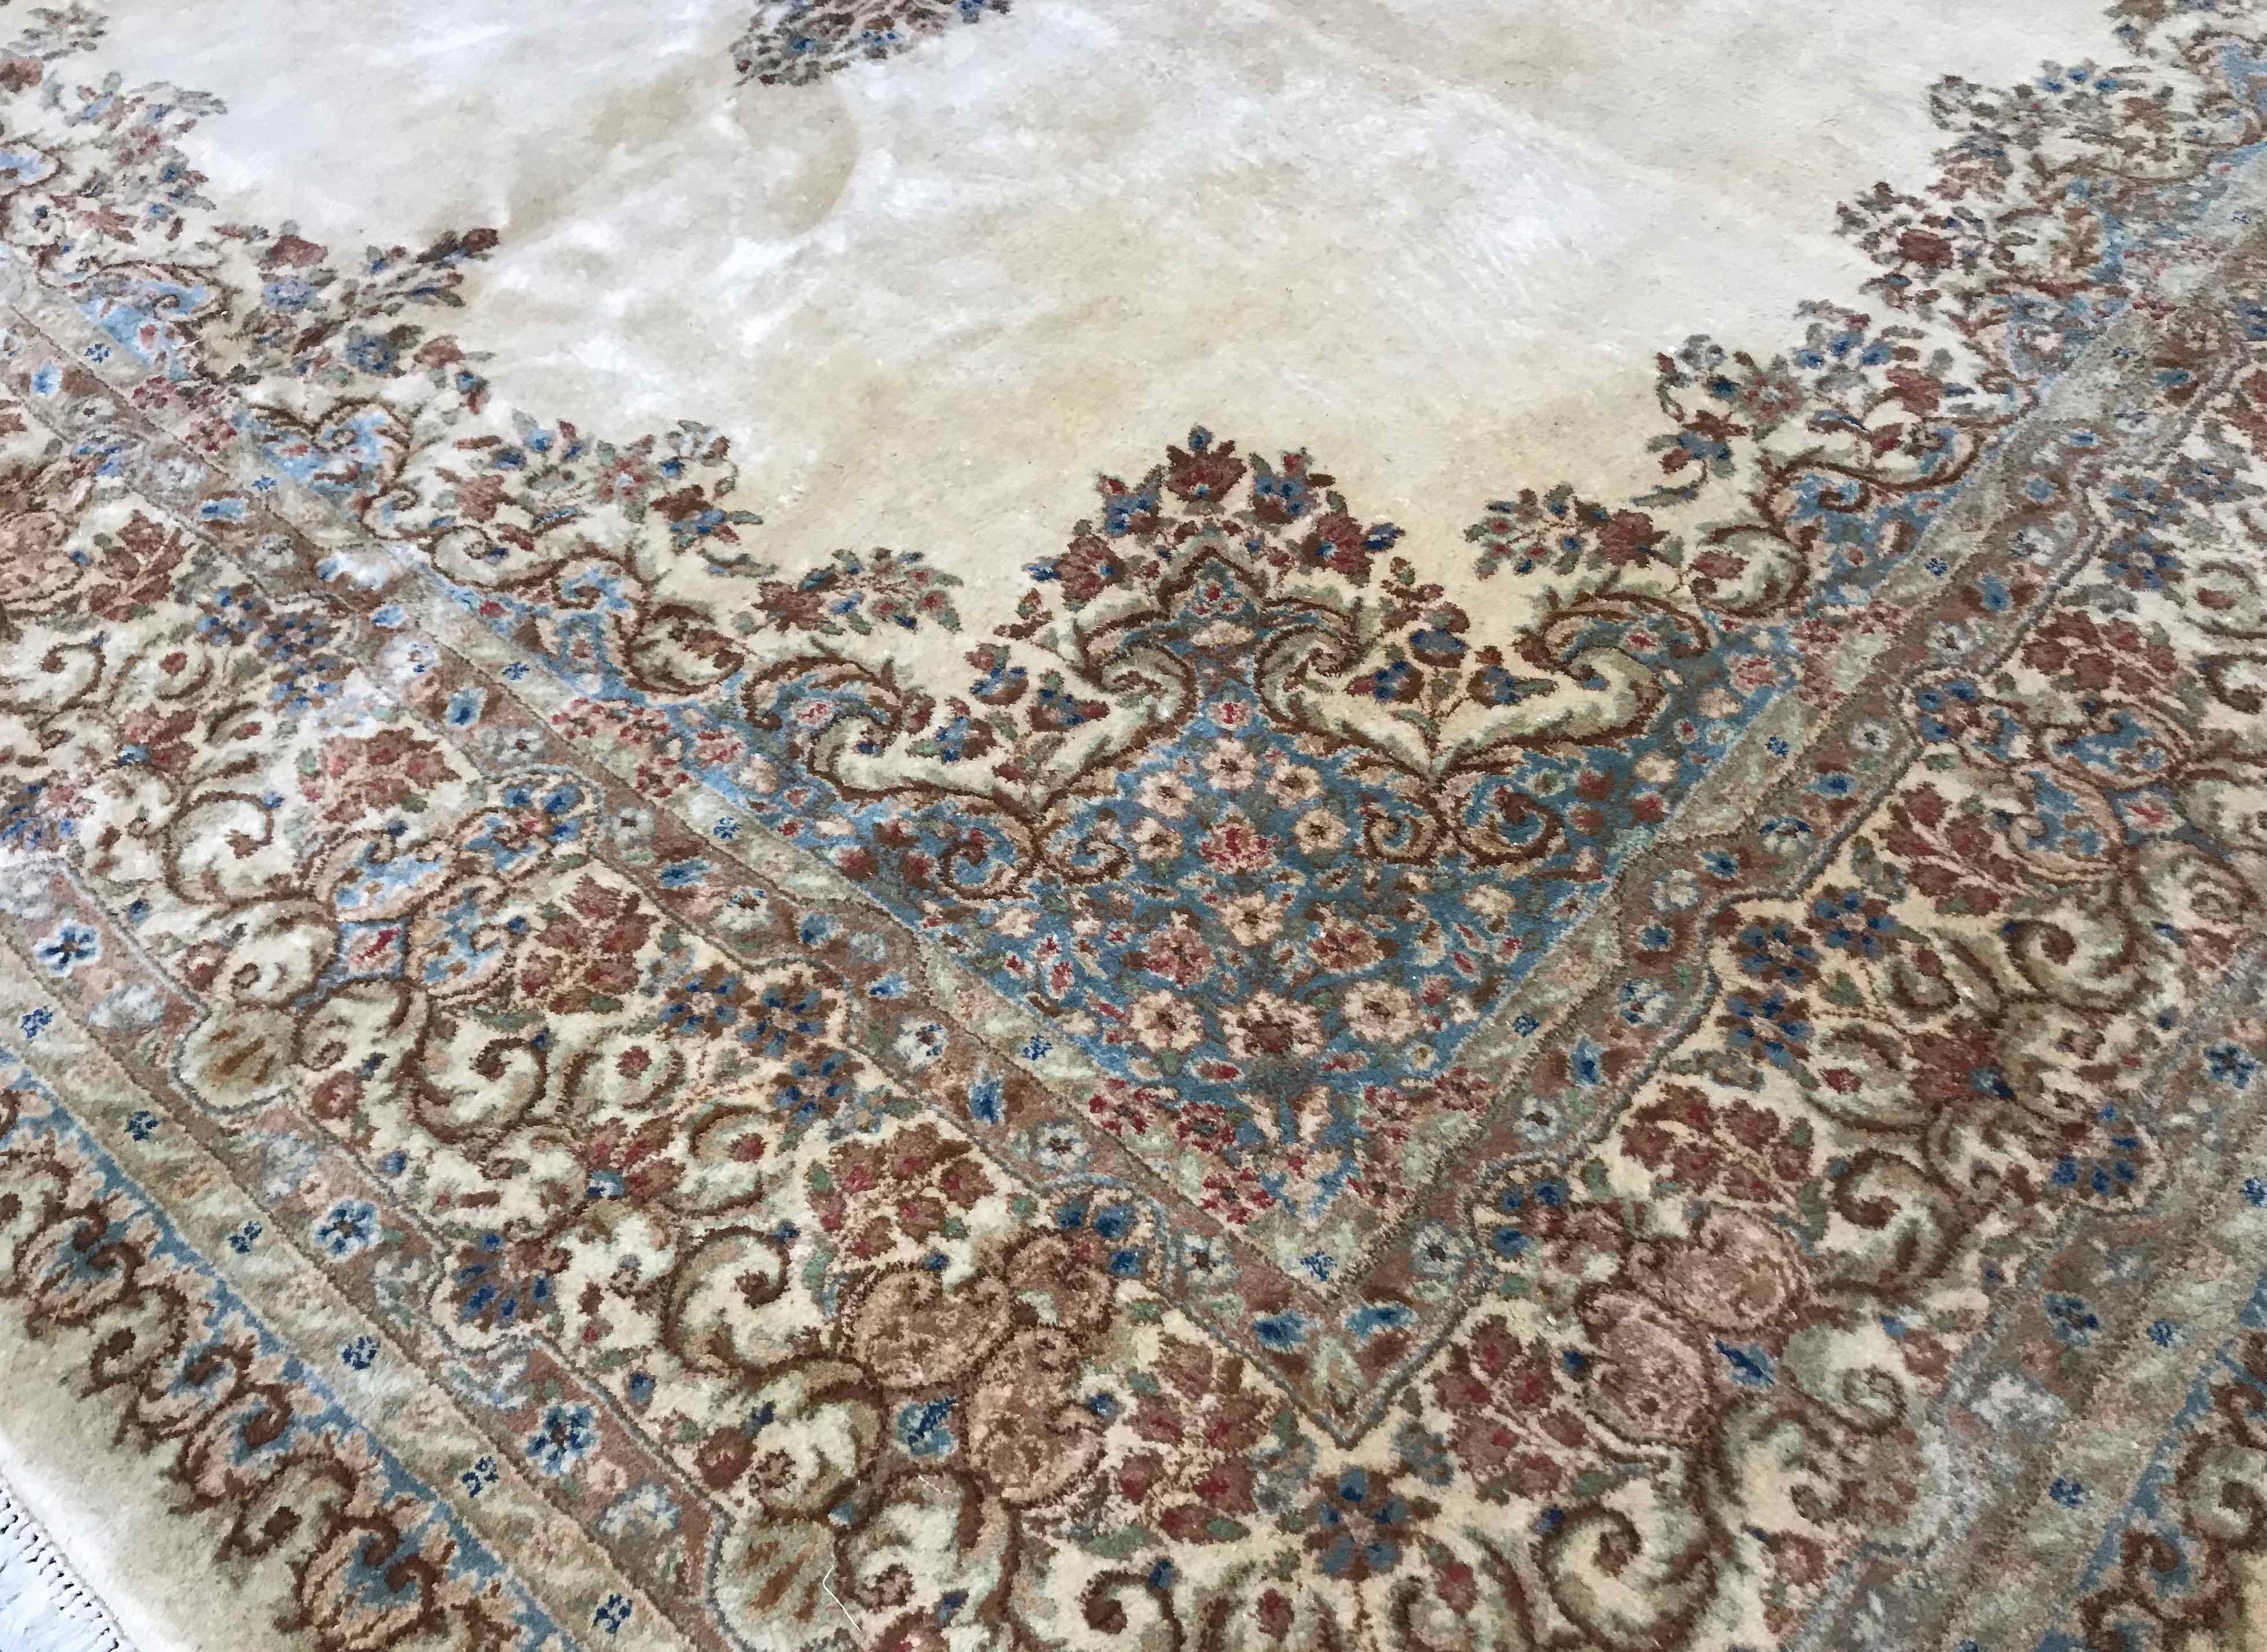 Vintage Persian Kerman, circa 1940. This large rug has a wonderfully soft central filed, filled with floral designs surrounding a central medallion in soft blues that extends into the border to create a relaxed and gentle feel to this 1940s vintage